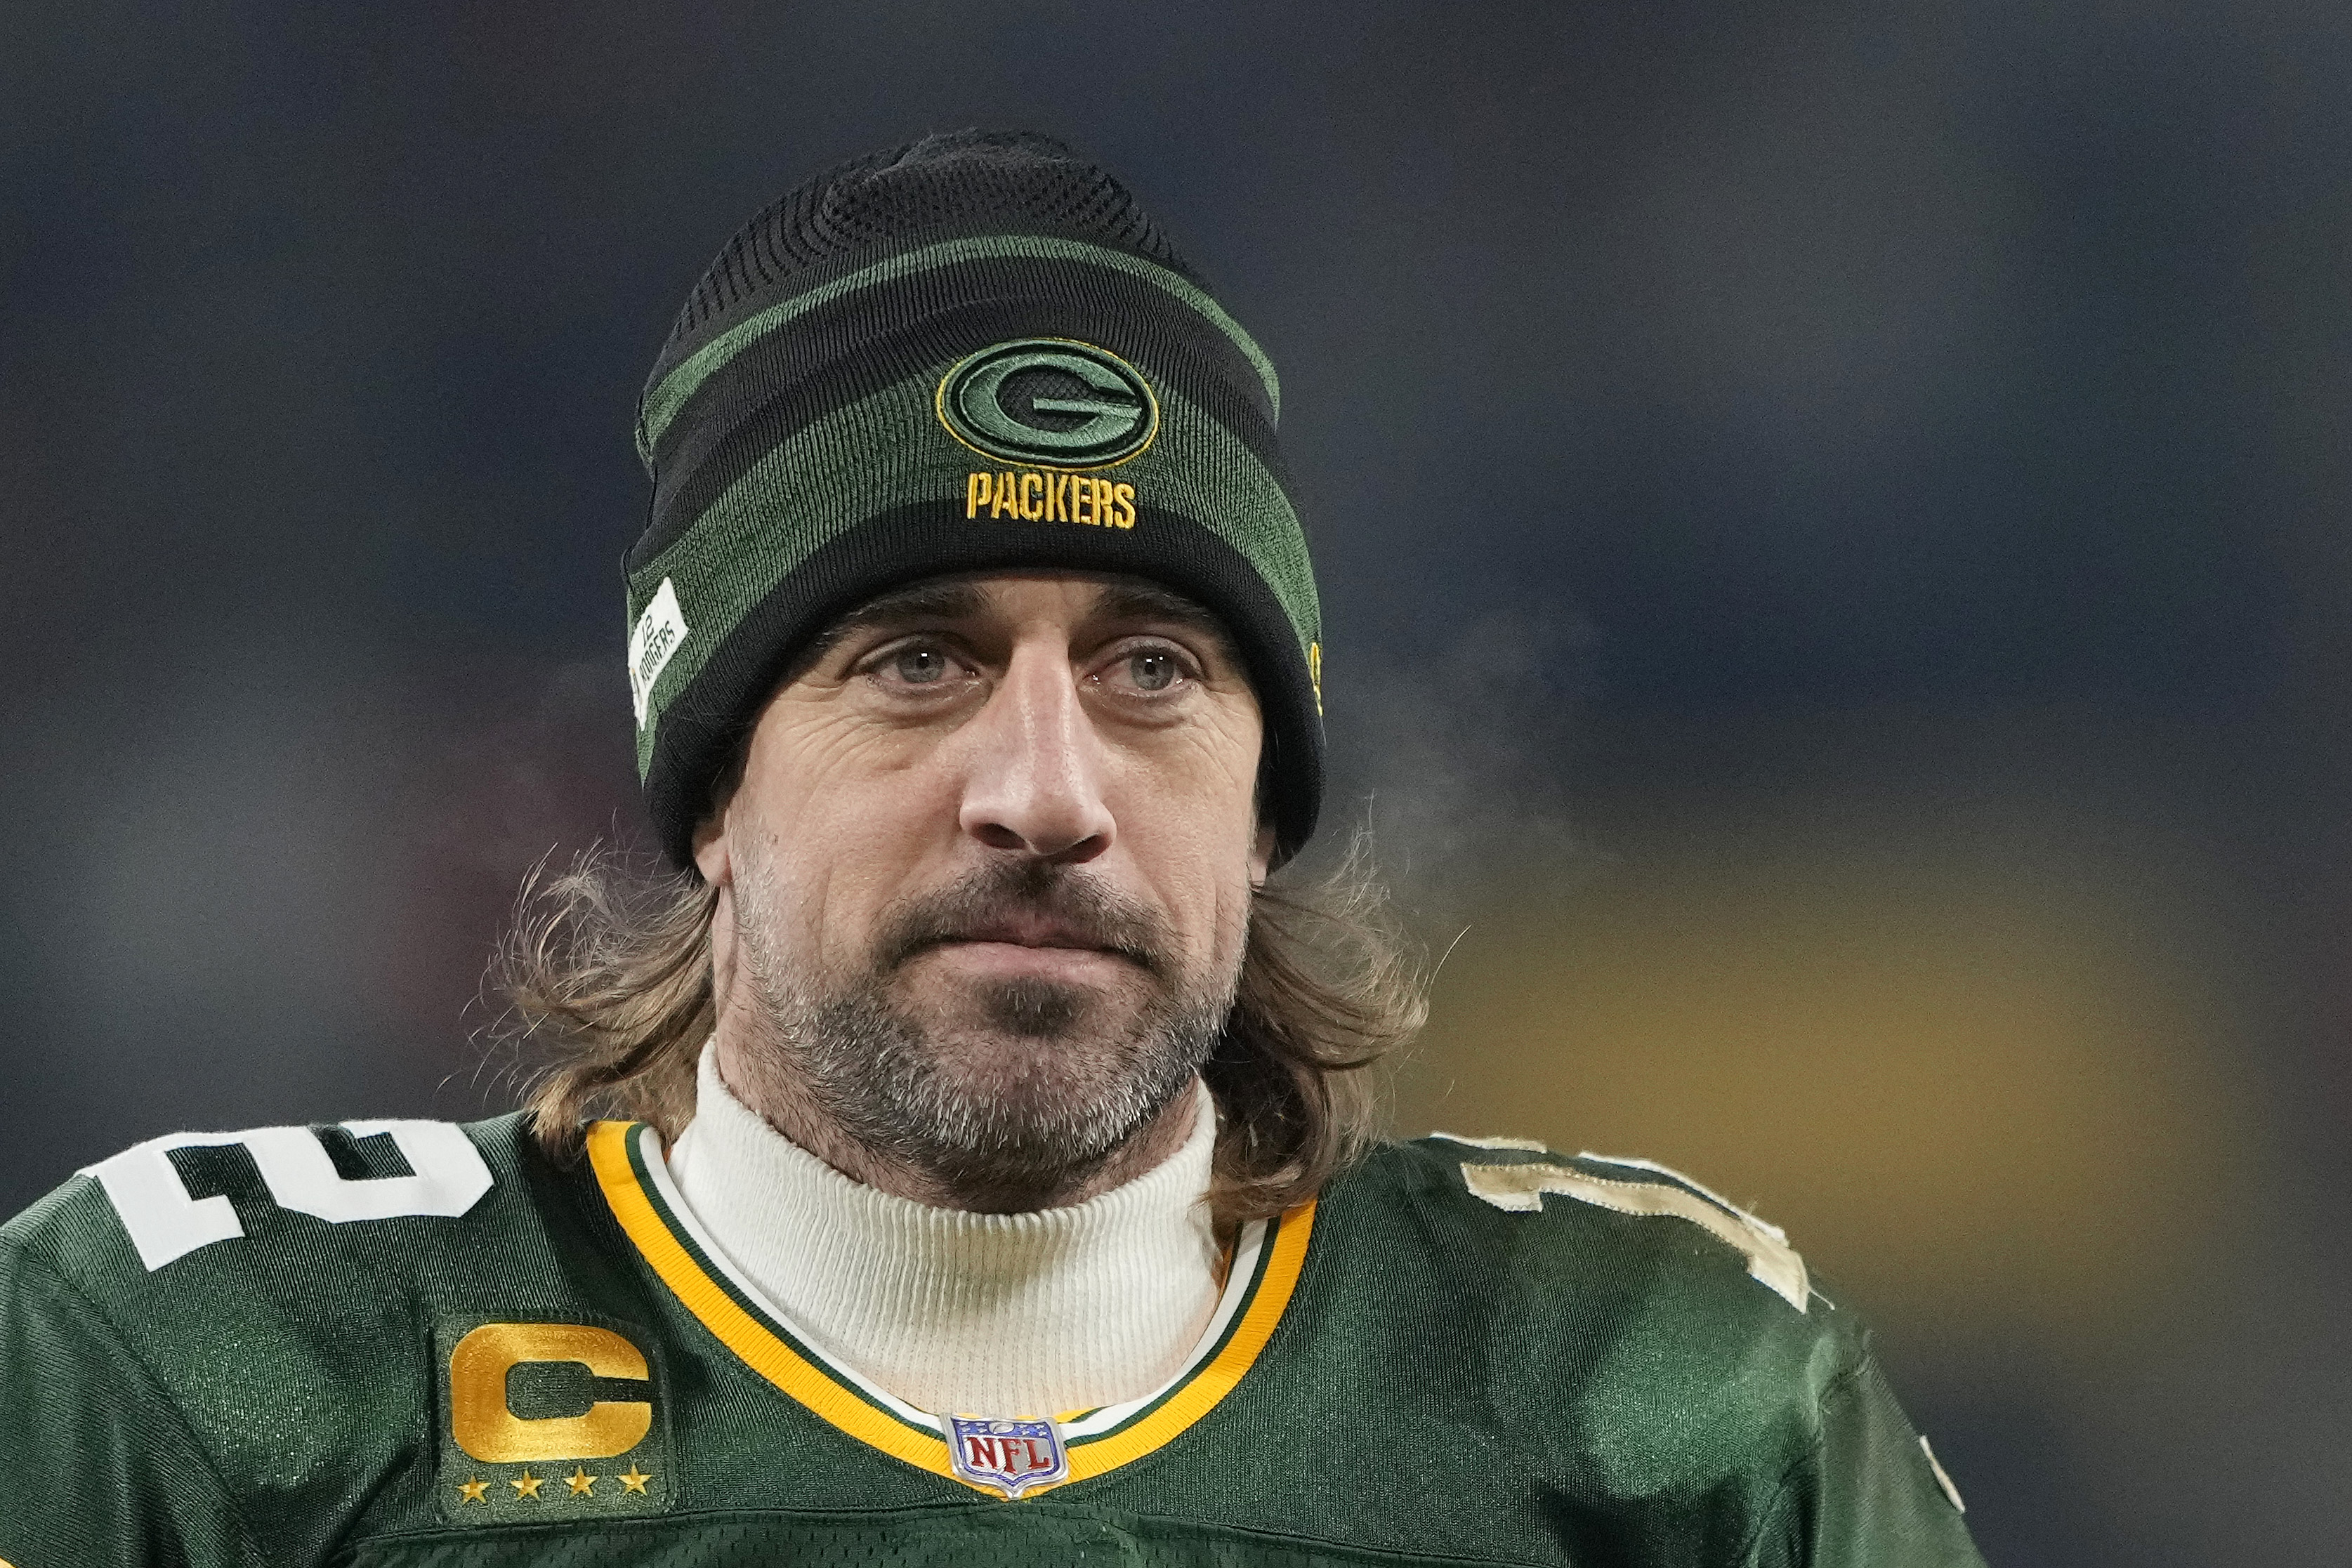 Packers QB Aaron Rodgers won another NFL MVP.